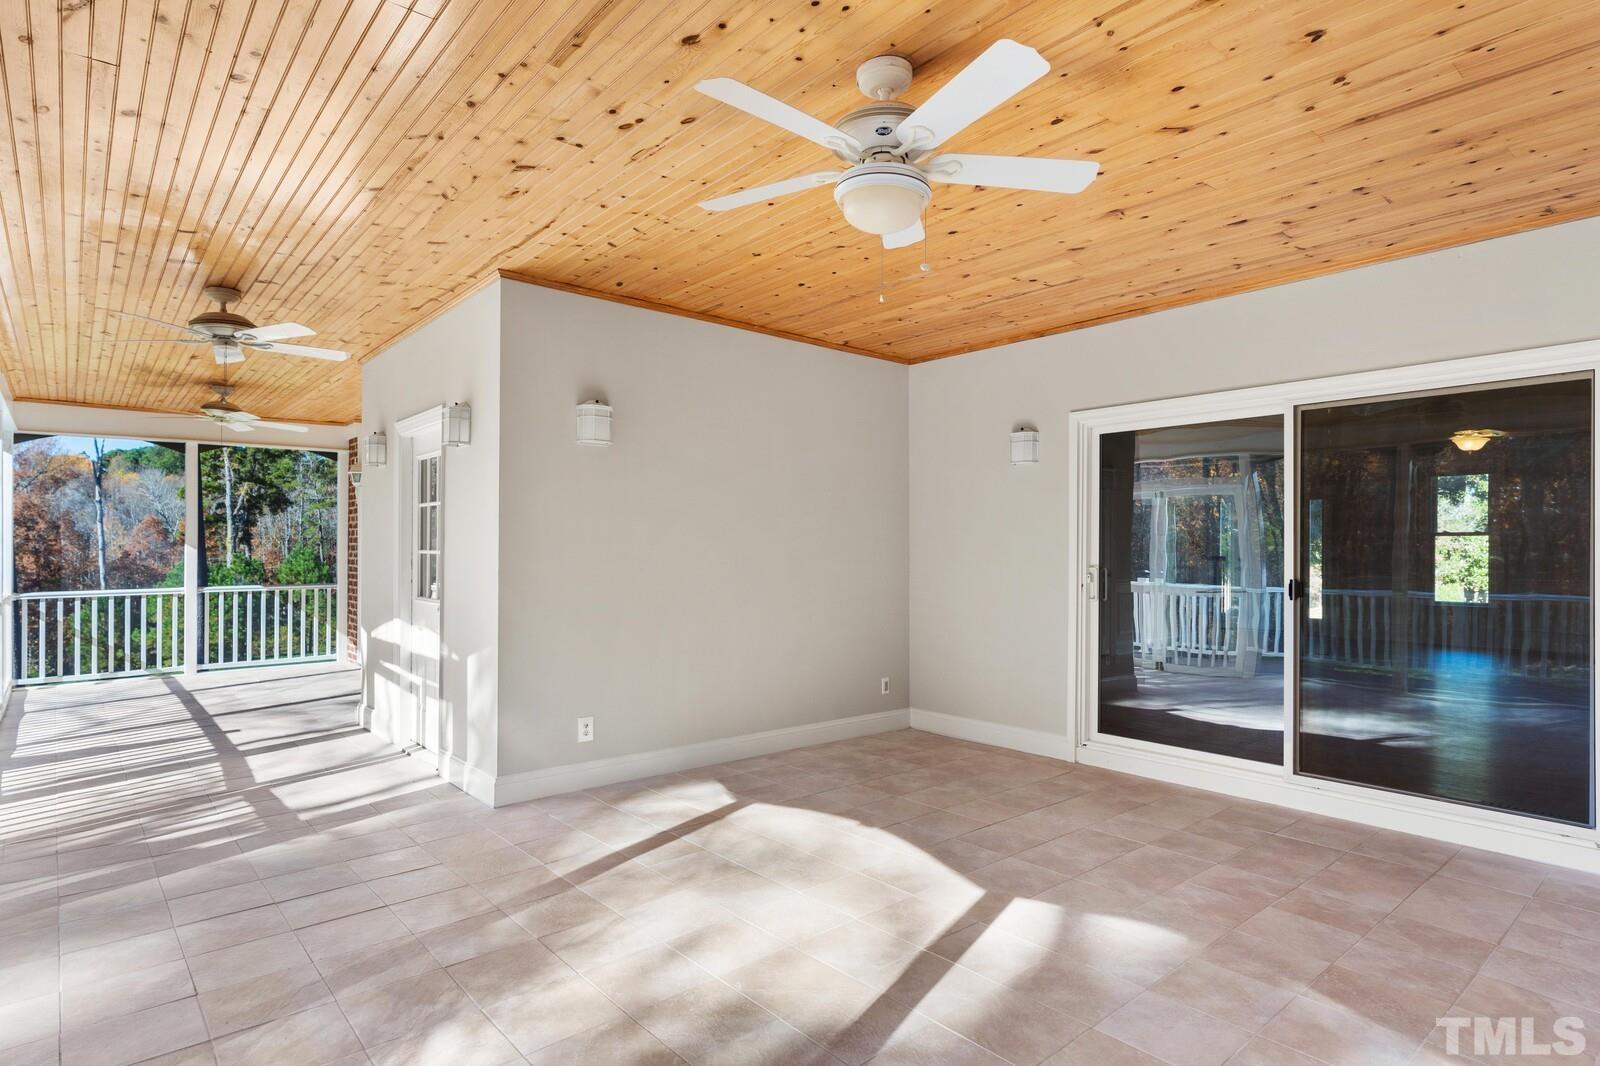 Huge Screened Porch with Multiple Fans